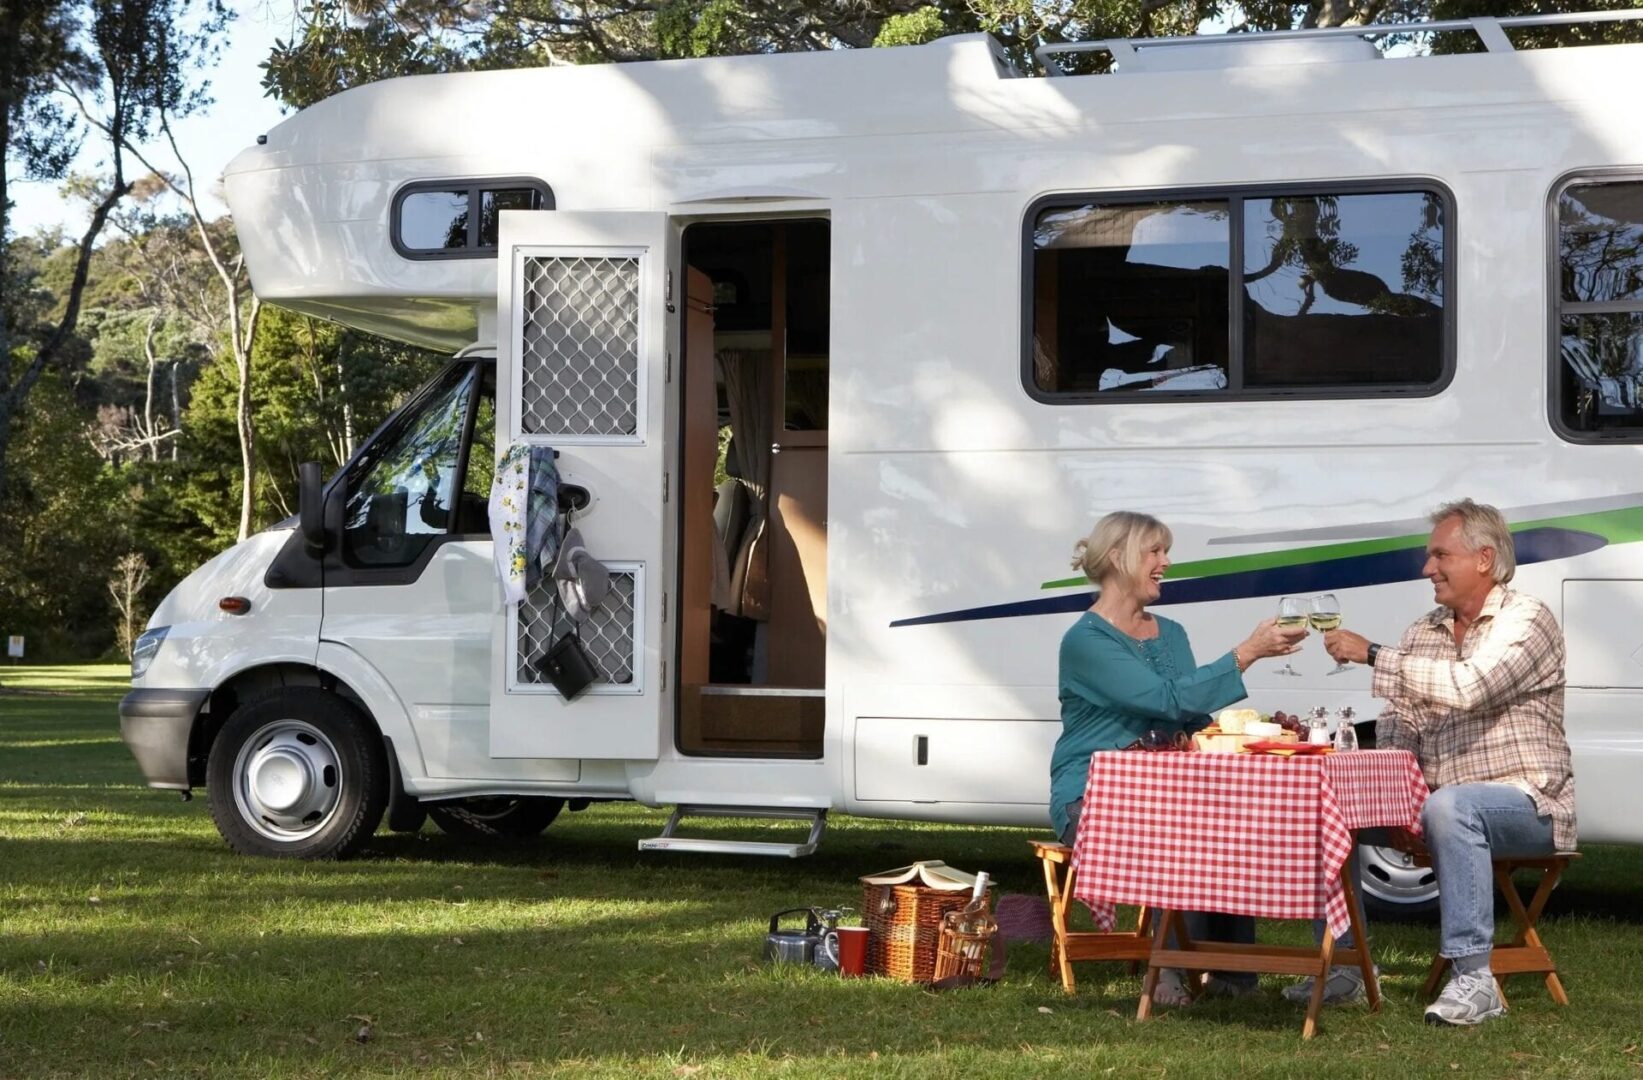 A couple toasting their wine glasses while having a picnic outside their RV